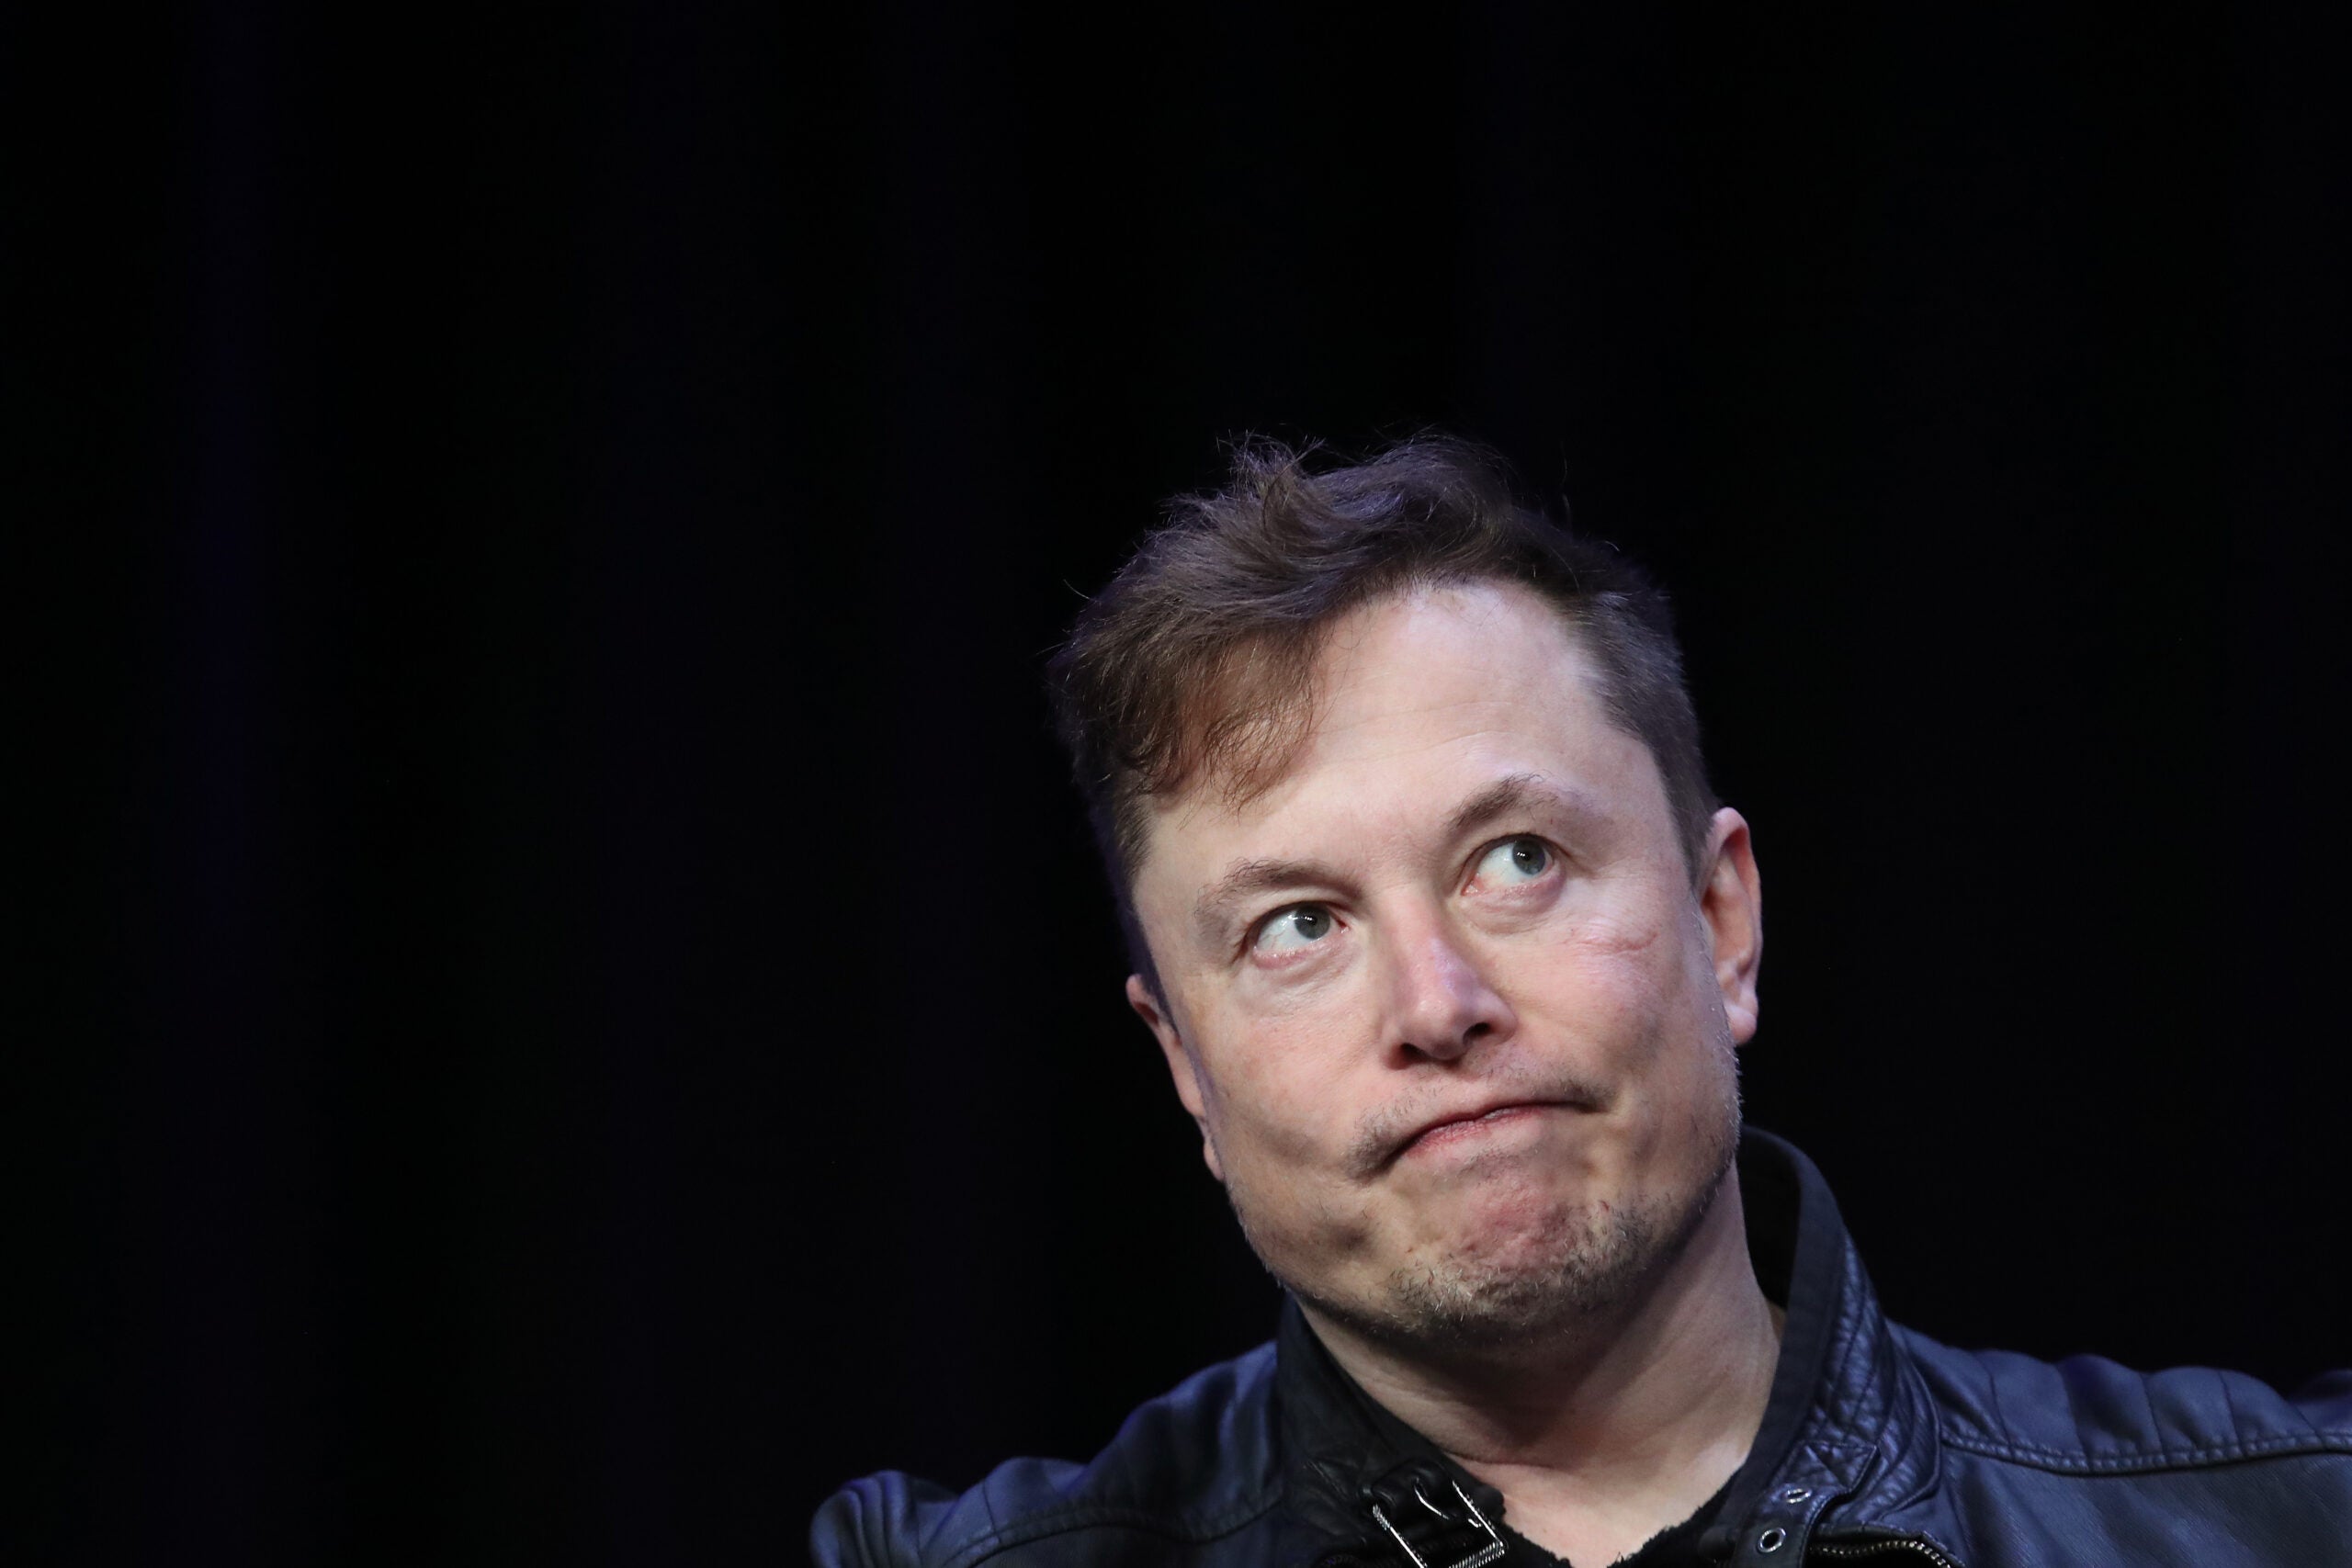 Elon Musk adds $78bn to bitcoin value with a Tweet